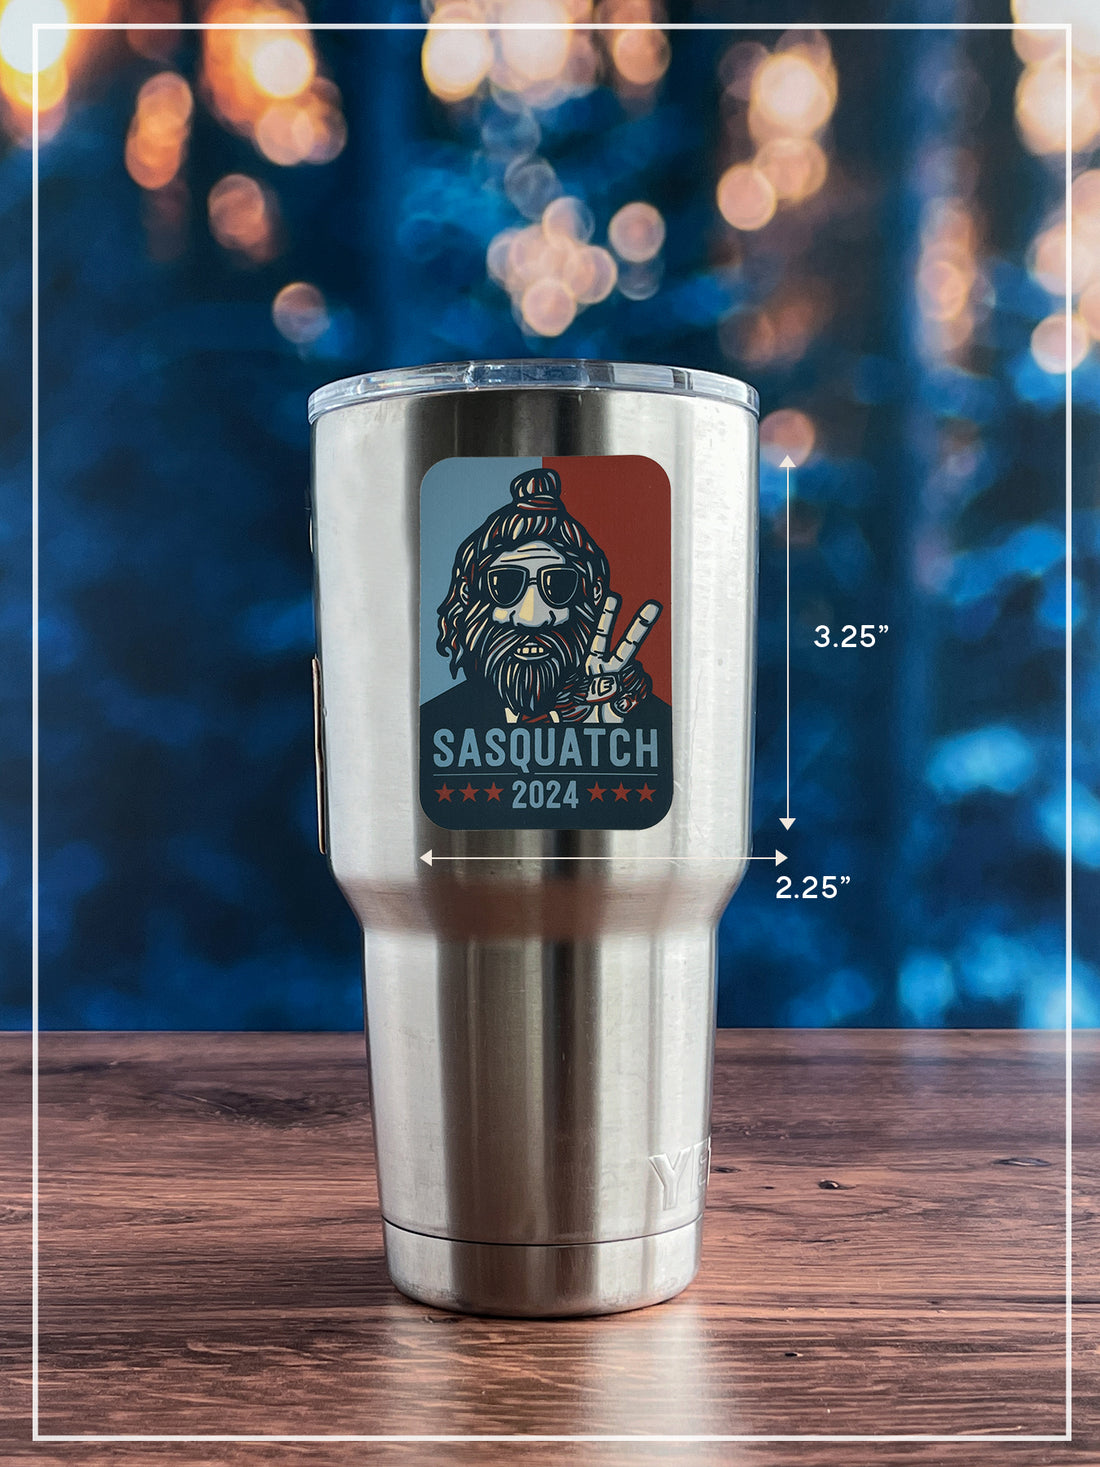 Sasquatch 2024 sticker placed on stainless steel insulated cup. Trees and lights in the far background.